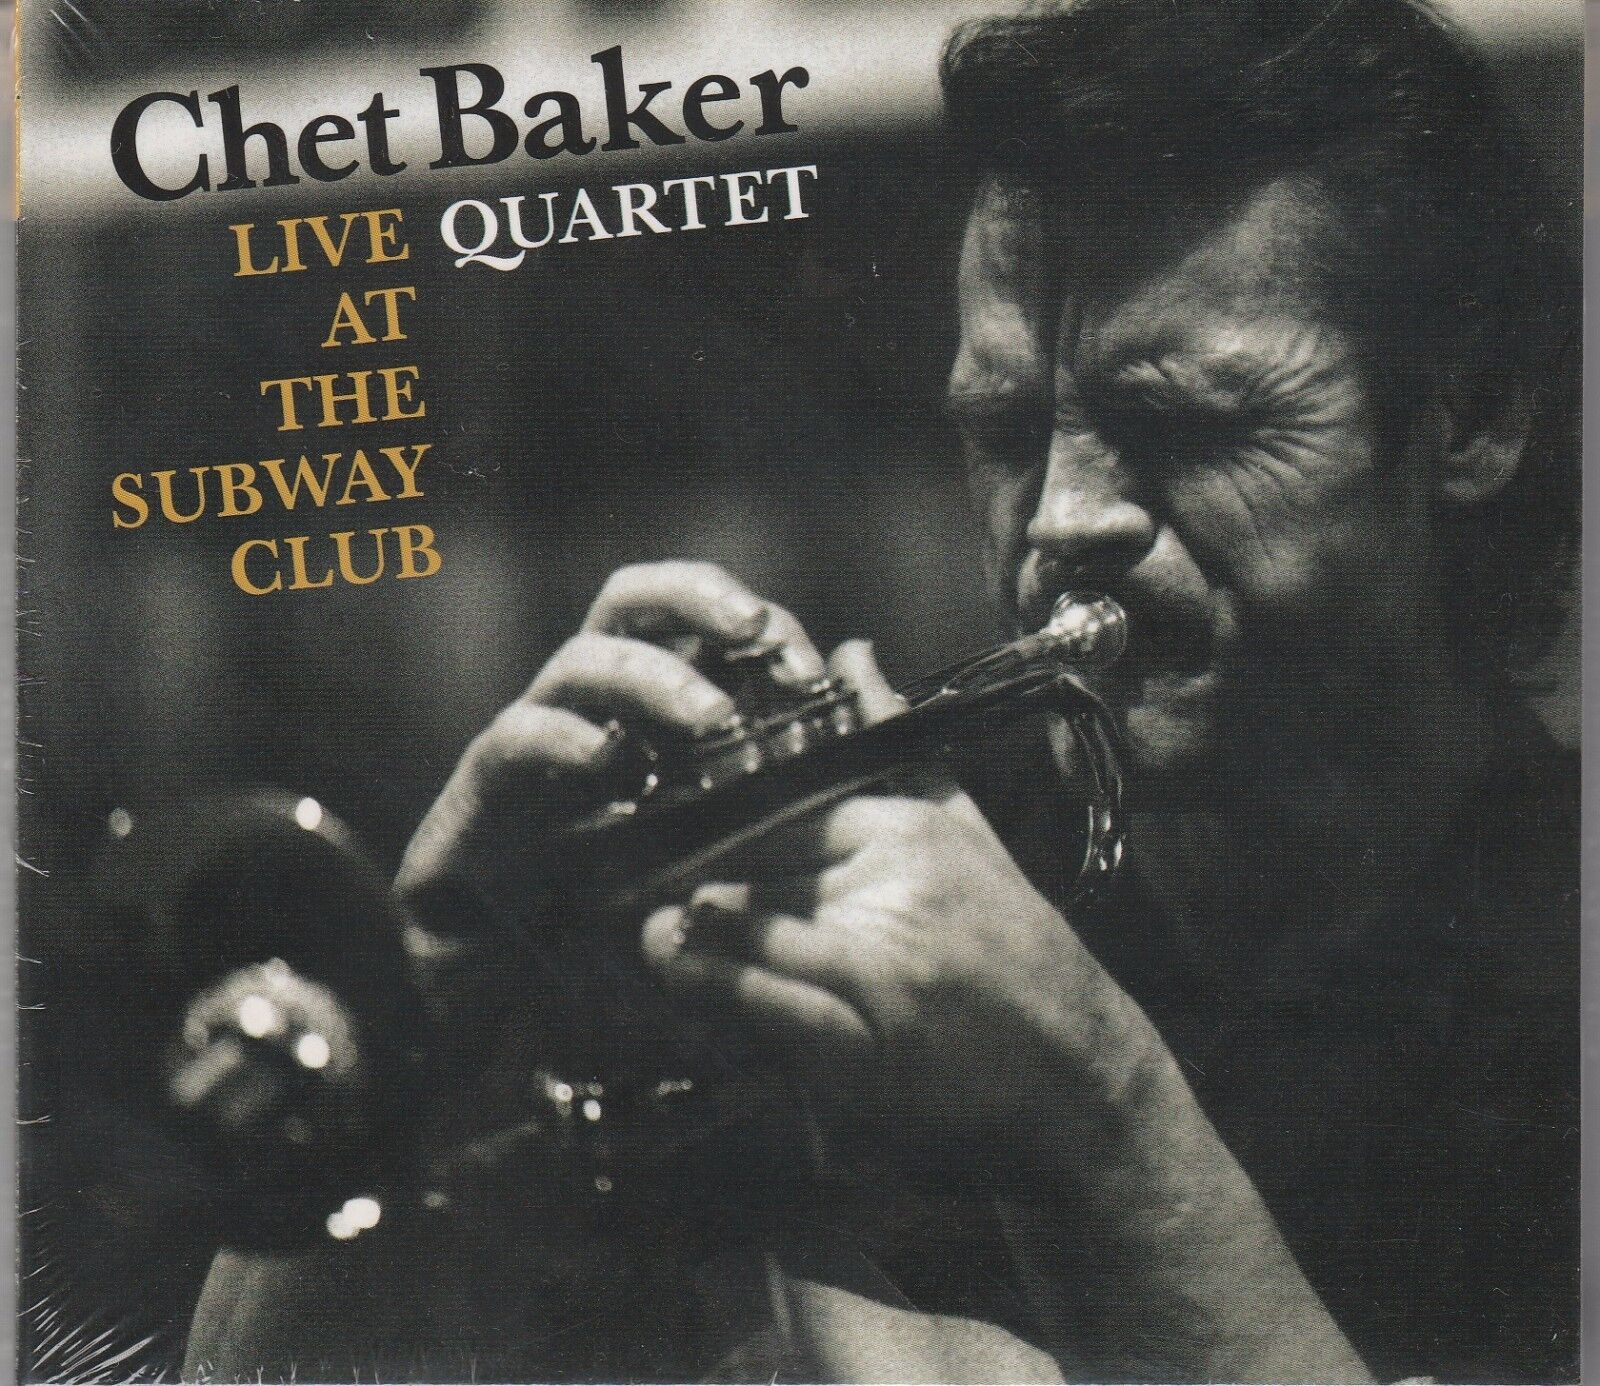 Live at the Subway Club  by Chet Baker